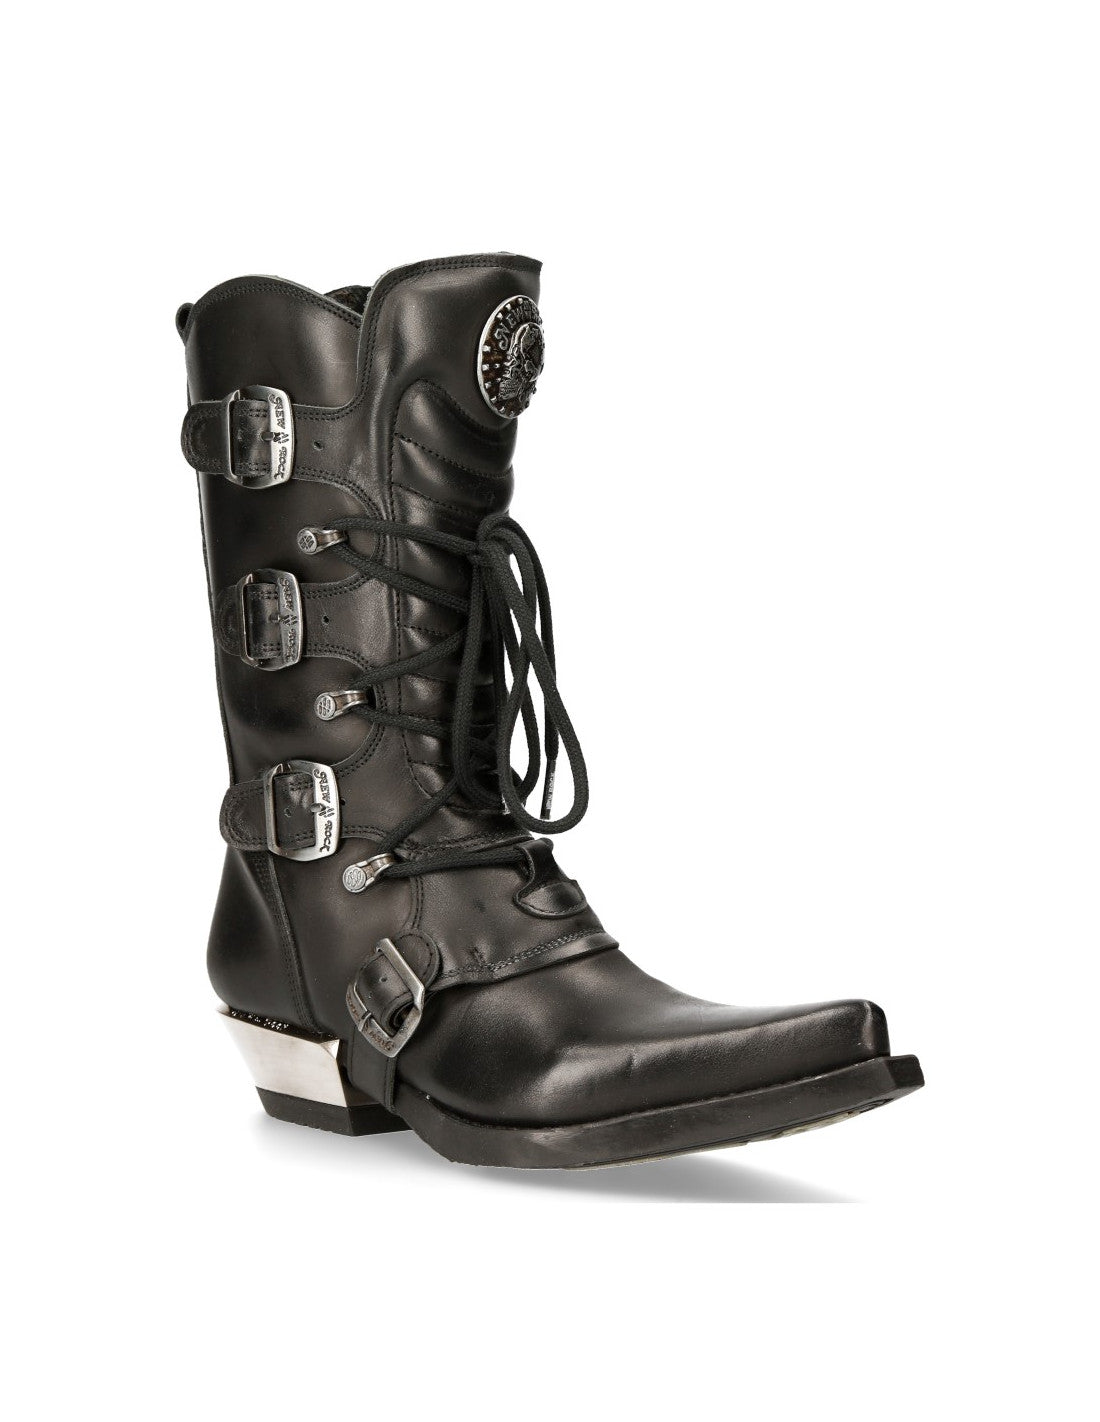 New Rock Boot West M-7993-S1